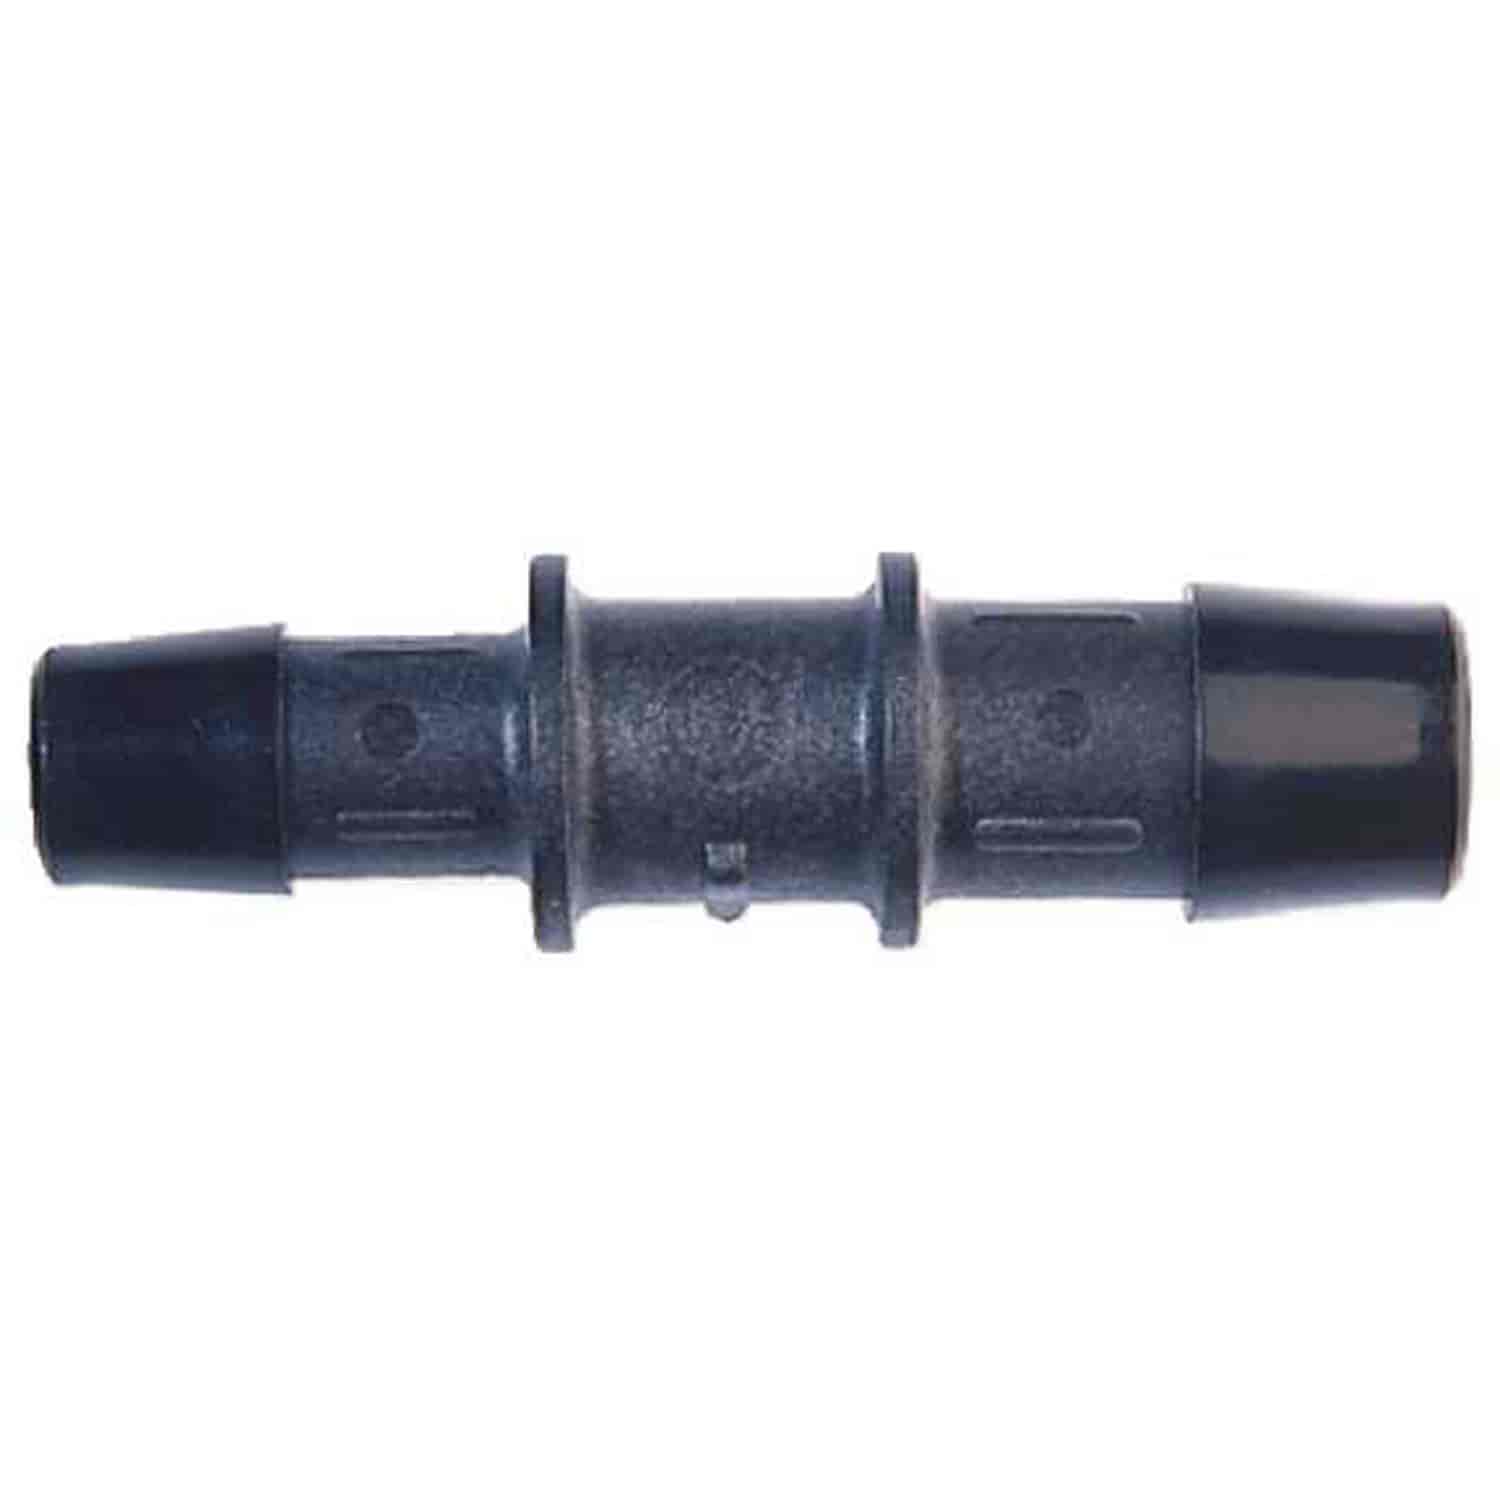 Plastic Hose Connector Reducer [Straight, 3/32 in. to 1/8 in. Outside Diameter]